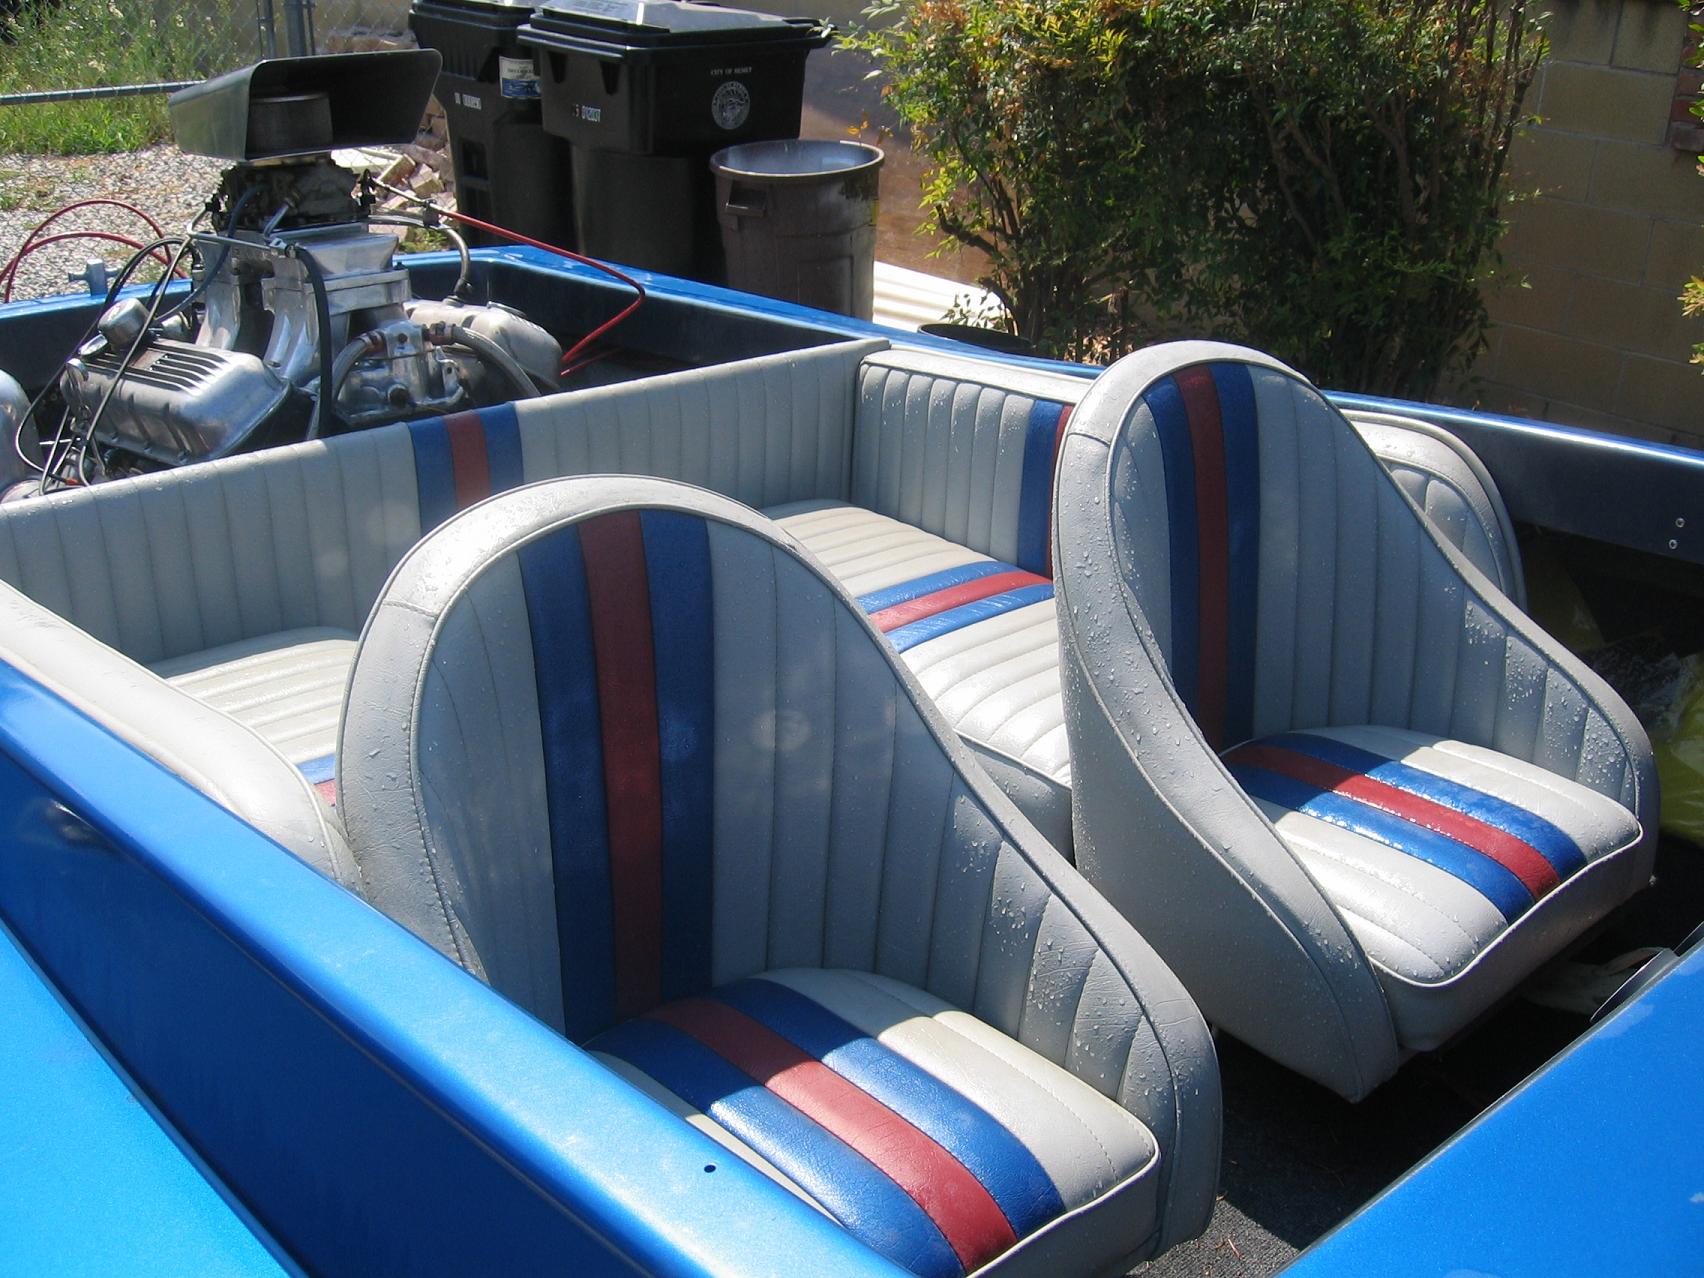 Jet Boat Interior Pictures | www.indiepedia.org